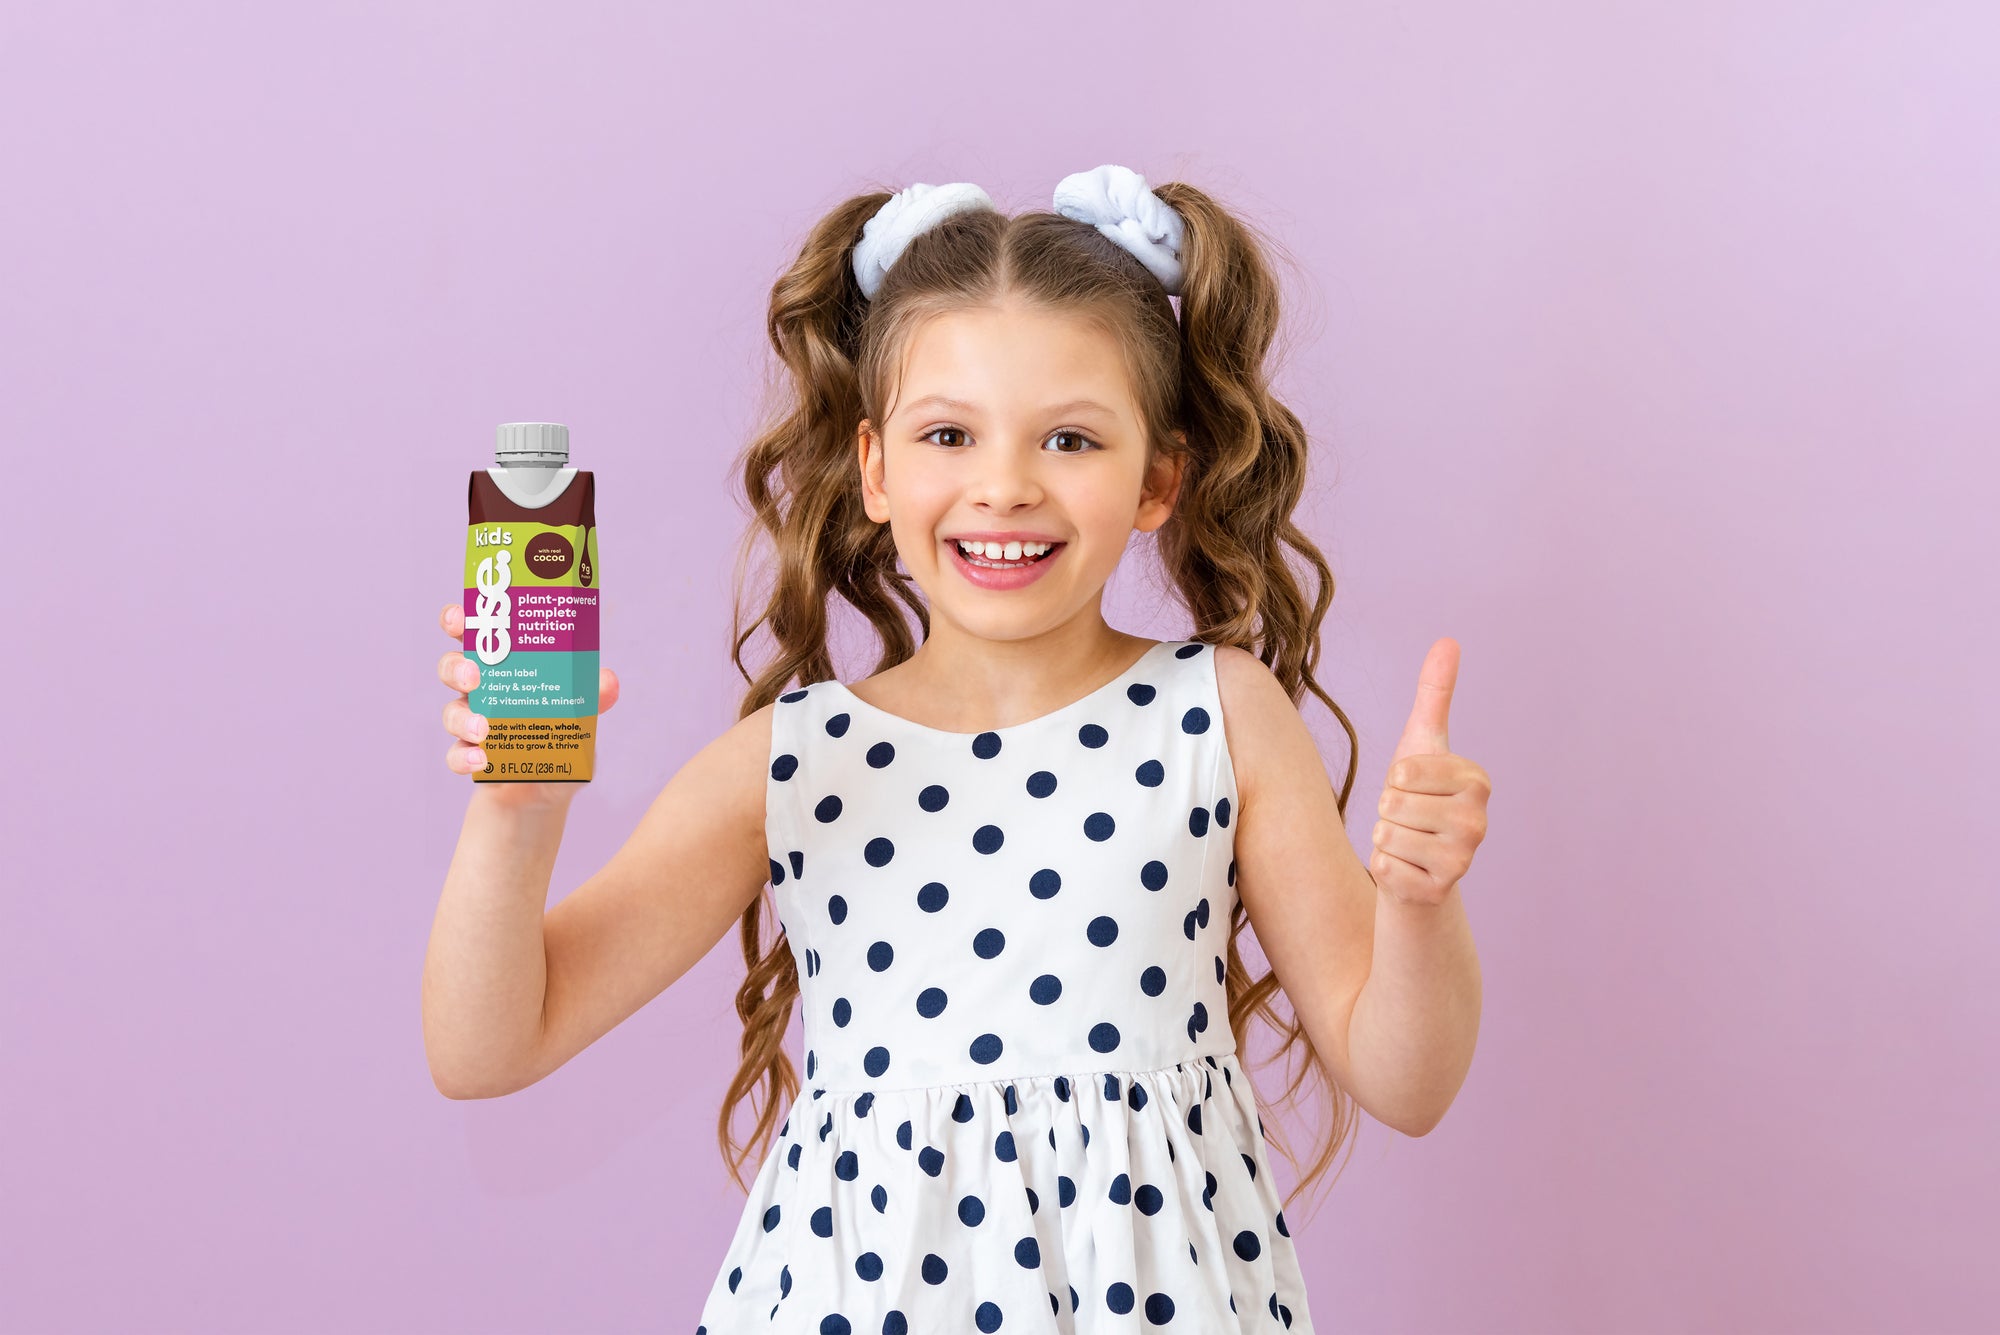 lunch ideas for picky eater success | else kids shakes held by a happy girl